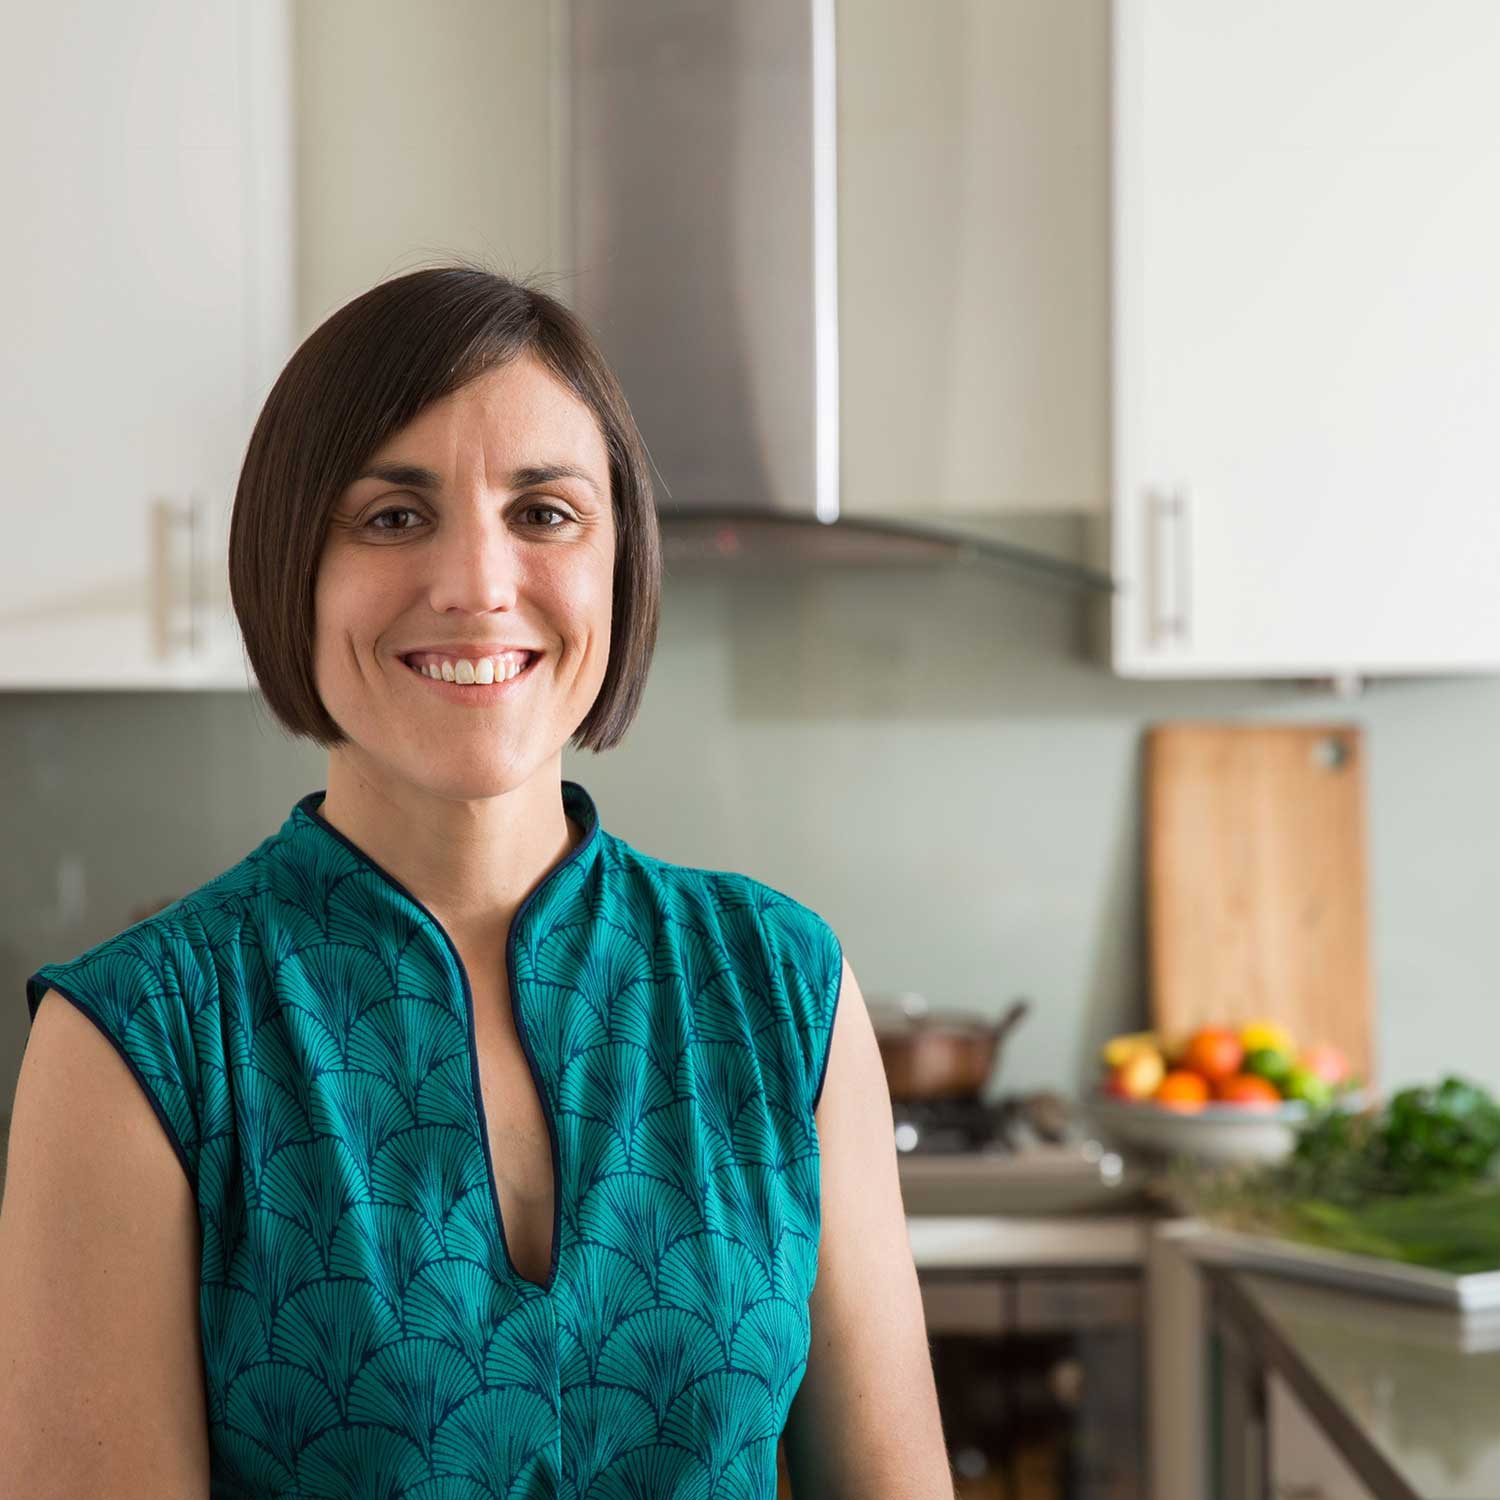 University of Newcastle PhD candidate, Accredited Practising Dietitian and qualified chef, Ms Roberta Asher